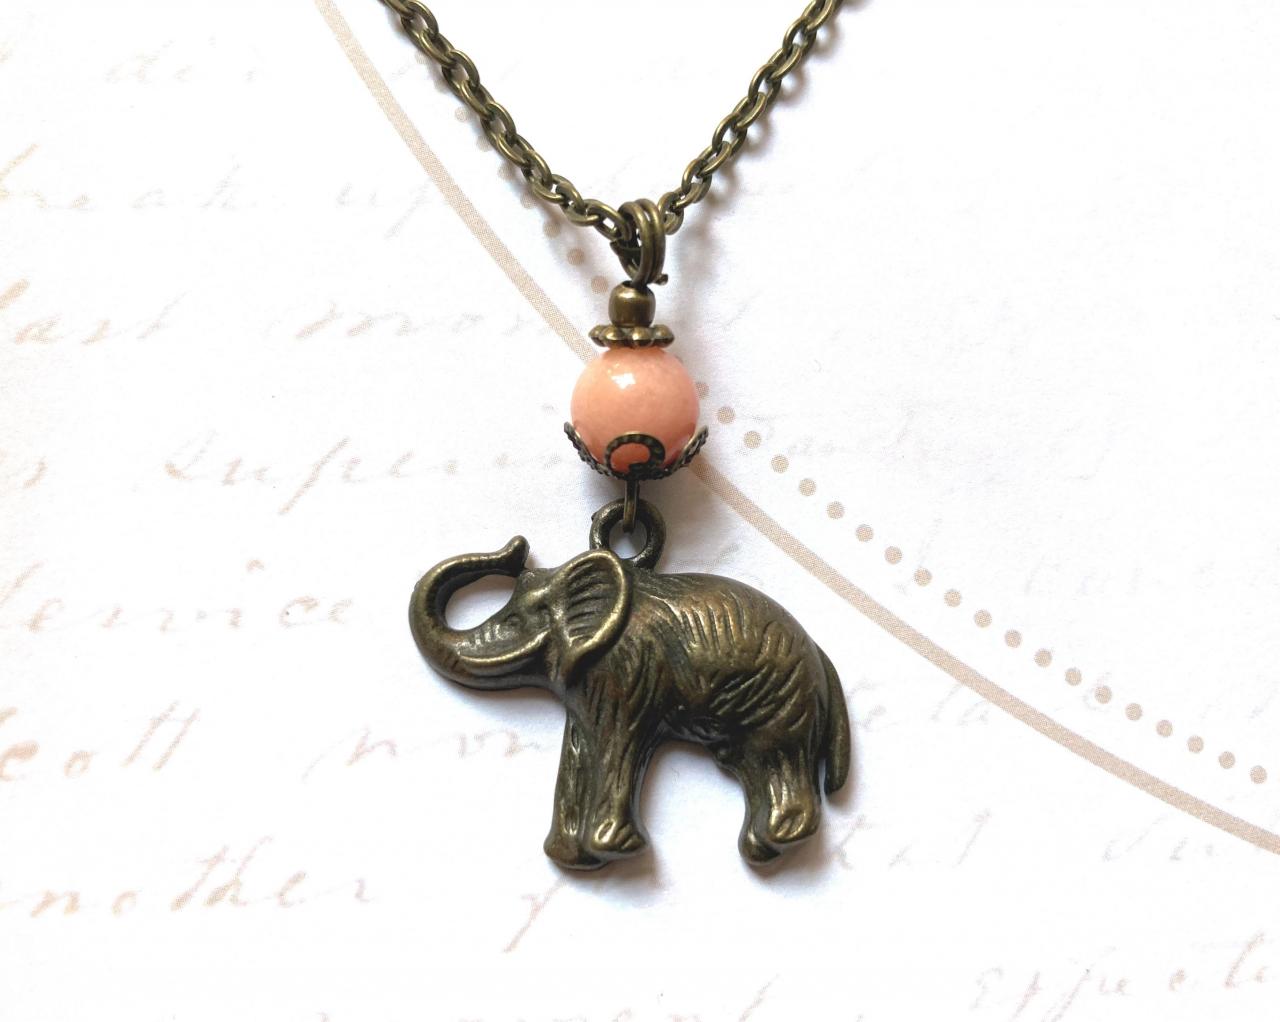 Lovely Elephant Necklace With A Peach Jade Pearl, Selma Dreams